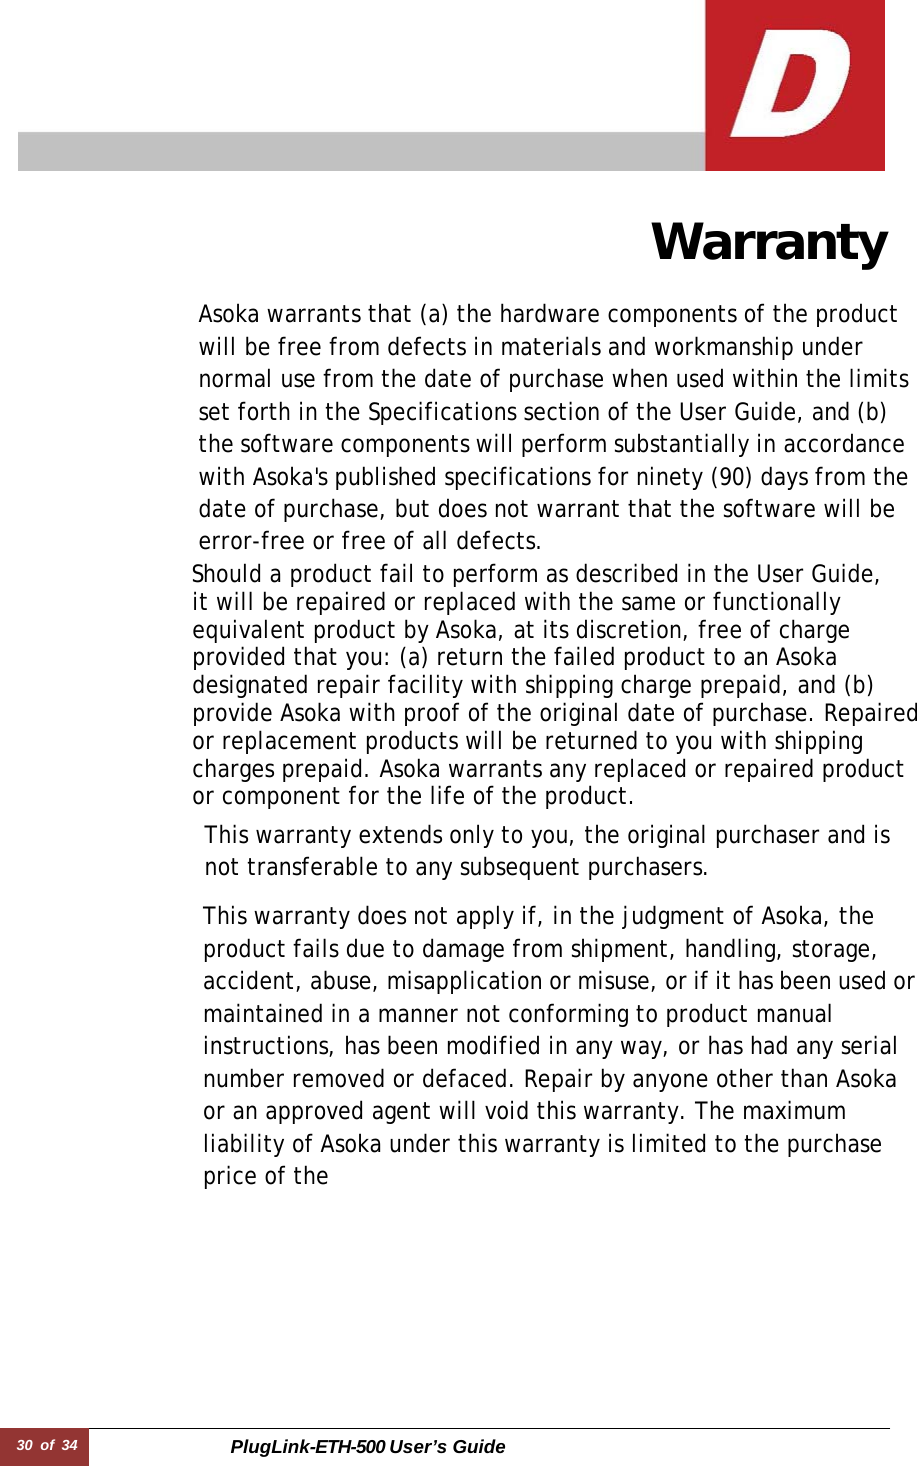 30 of 34 PlugLink-ETH-500 User’s Guide      Warranty  Asoka warrants that (a) the hardware components of the product will be free from defects in materials and workmanship under normal use from the date of purchase when used within the limits set forth in the Specifications section of the User Guide, and (b) the software components will perform substantially in accordance with Asoka&apos;s published specifications for ninety (90) days from the date of purchase, but does not warrant that the software will be error-free or free of all defects. Should a product fail to perform as described in the User Guide,  it will be repaired or replaced with the same or functionally equivalent product by Asoka, at its discretion, free of charge provided that you: (a) return the failed product to an Asoka designated repair facility with shipping charge prepaid, and (b) provide Asoka with proof of the original date of purchase. Repaired or replacement products will be returned to you with shipping charges prepaid. Asoka warrants any replaced or repaired product or component for the life of the product.  This warranty extends only to you, the original purchaser and is not transferable to any subsequent purchasers.  This warranty does not apply if, in the judgment of Asoka, the product fails due to damage from shipment, handling, storage, accident, abuse, misapplication or misuse, or if it has been used or maintained in a manner not conforming to product manual instructions, has been modified in any way, or has had any serial number removed or defaced. Repair by anyone other than Asoka or an approved agent will void this warranty. The maximum liability of Asoka under this warranty is limited to the purchase price of the 